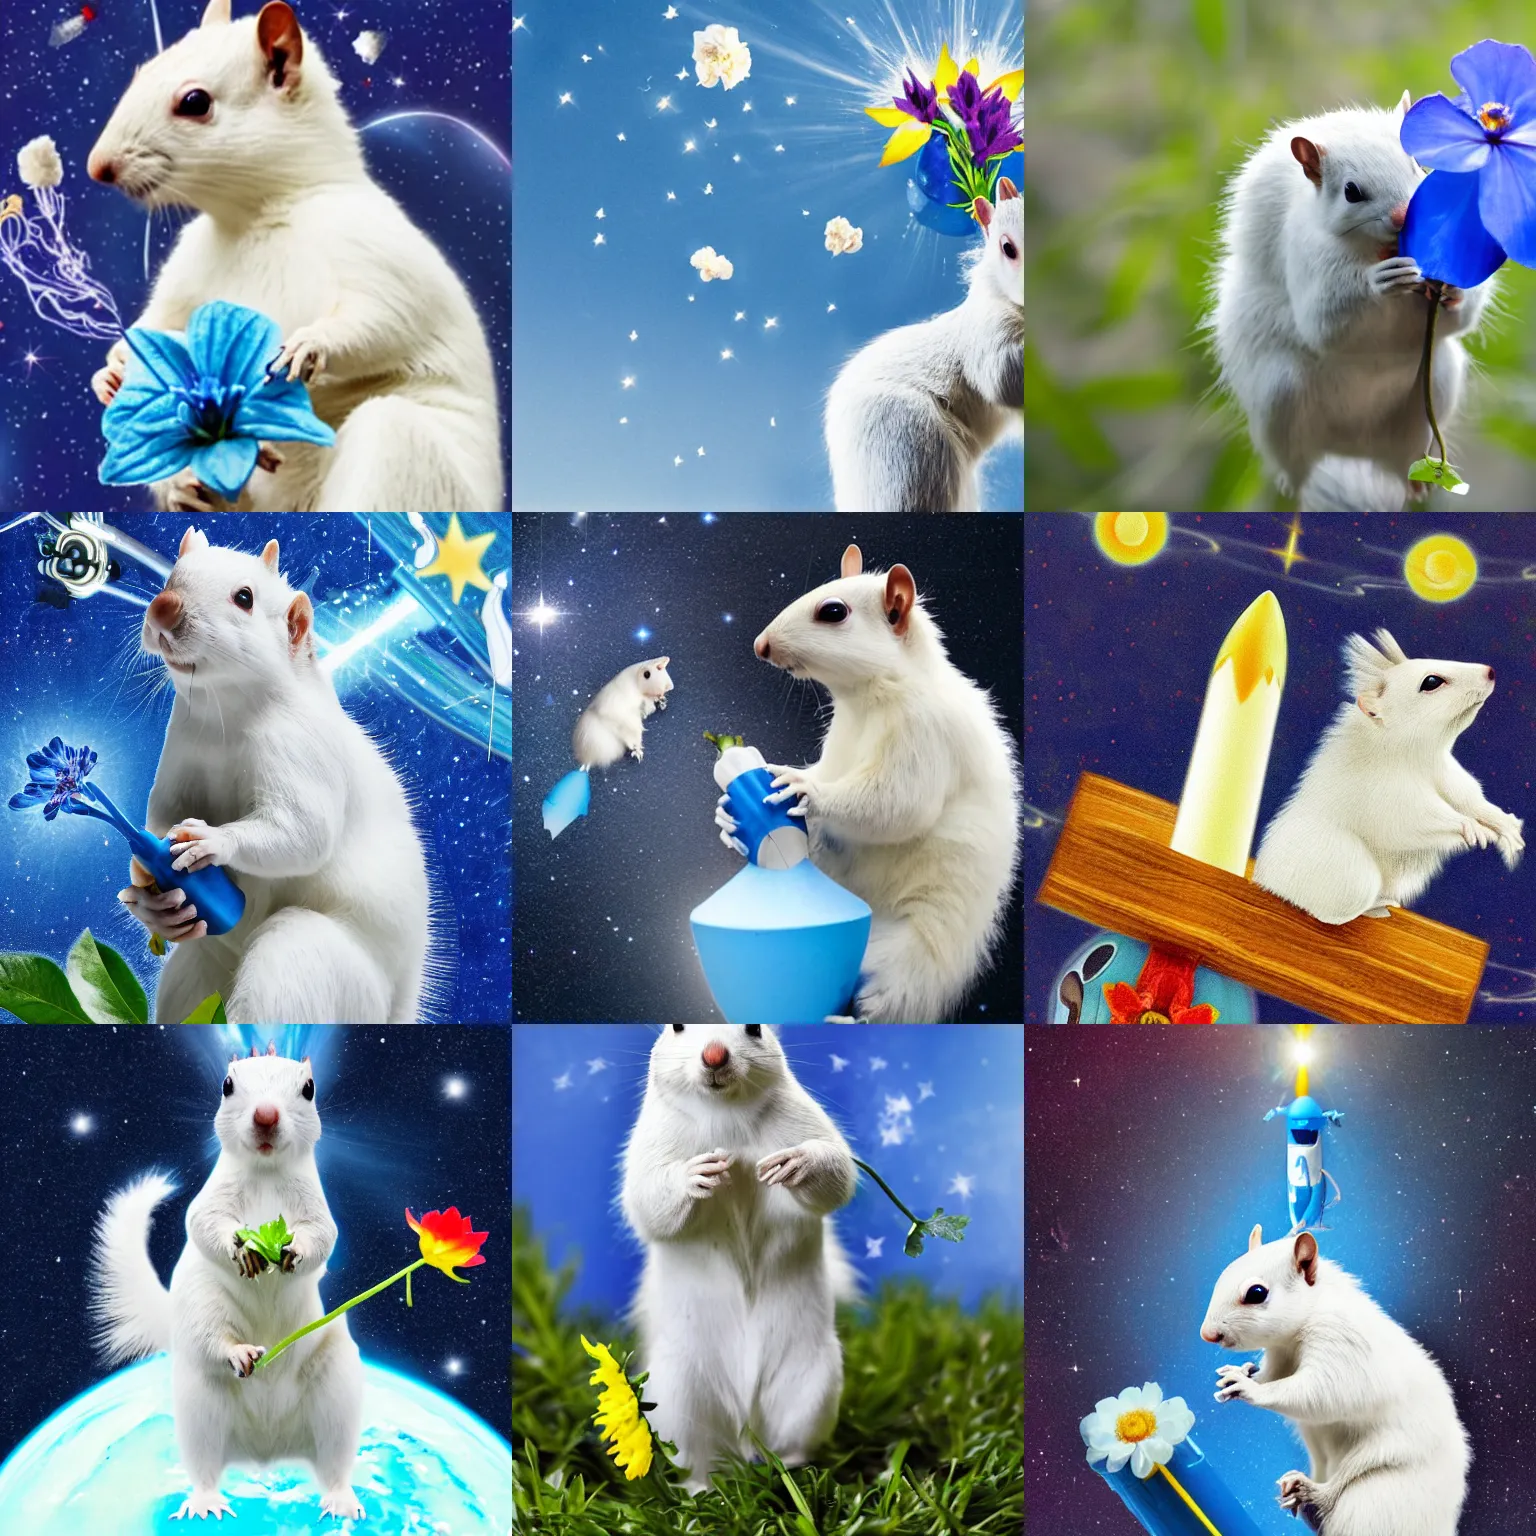 Prompt: photograph of a white squirrel riding a rocket in space with a blue flower in his hands